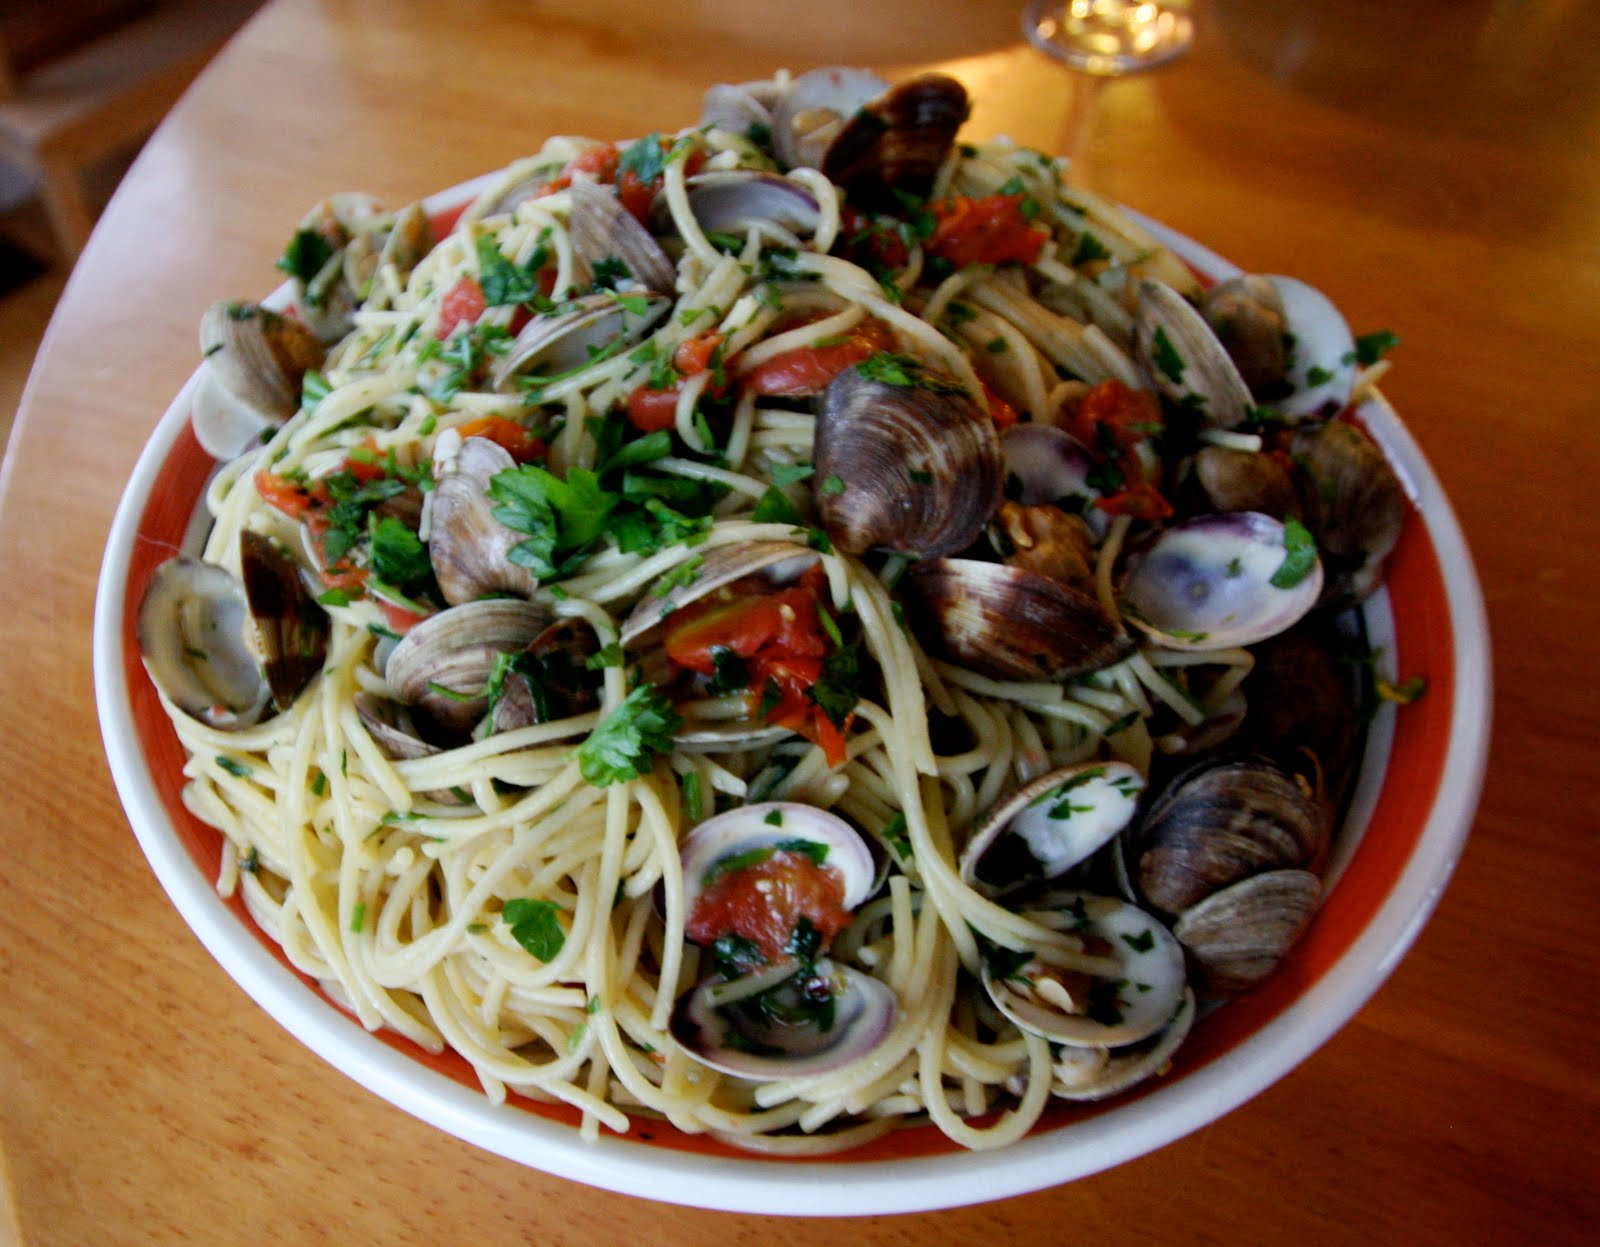 Dine Well: Spaghetti with Clams (Spaghetti alle Vongole)